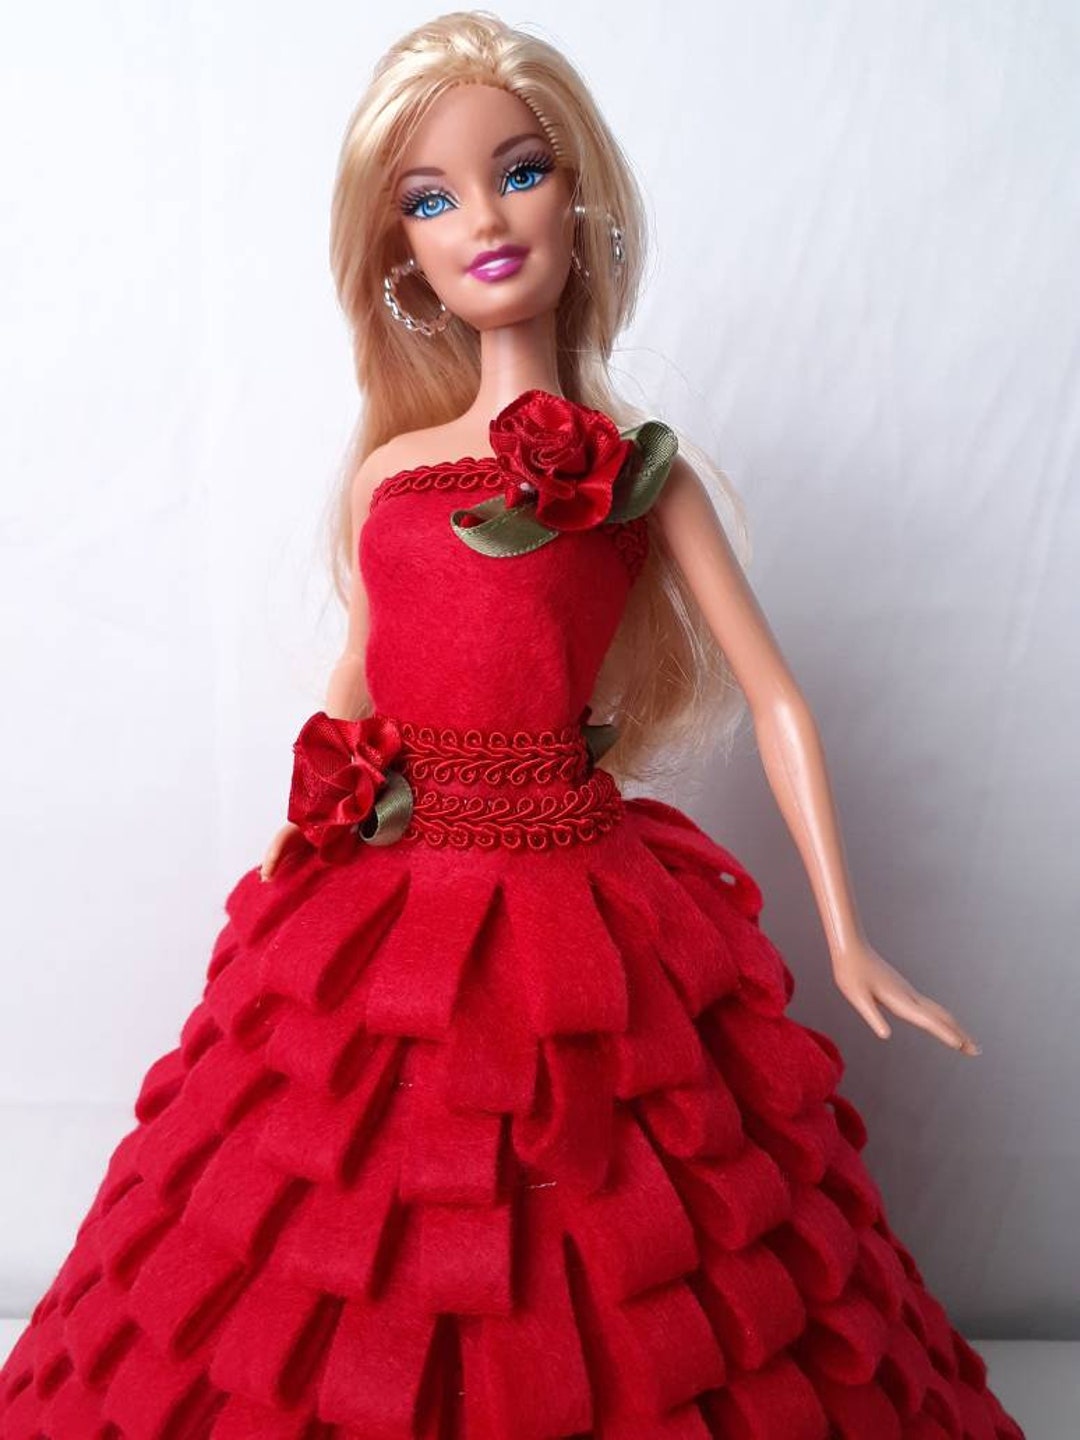 High Quality Handmade Long Evening Gown Lace Wedding Doll Dress for Barbie  Doll | eBay